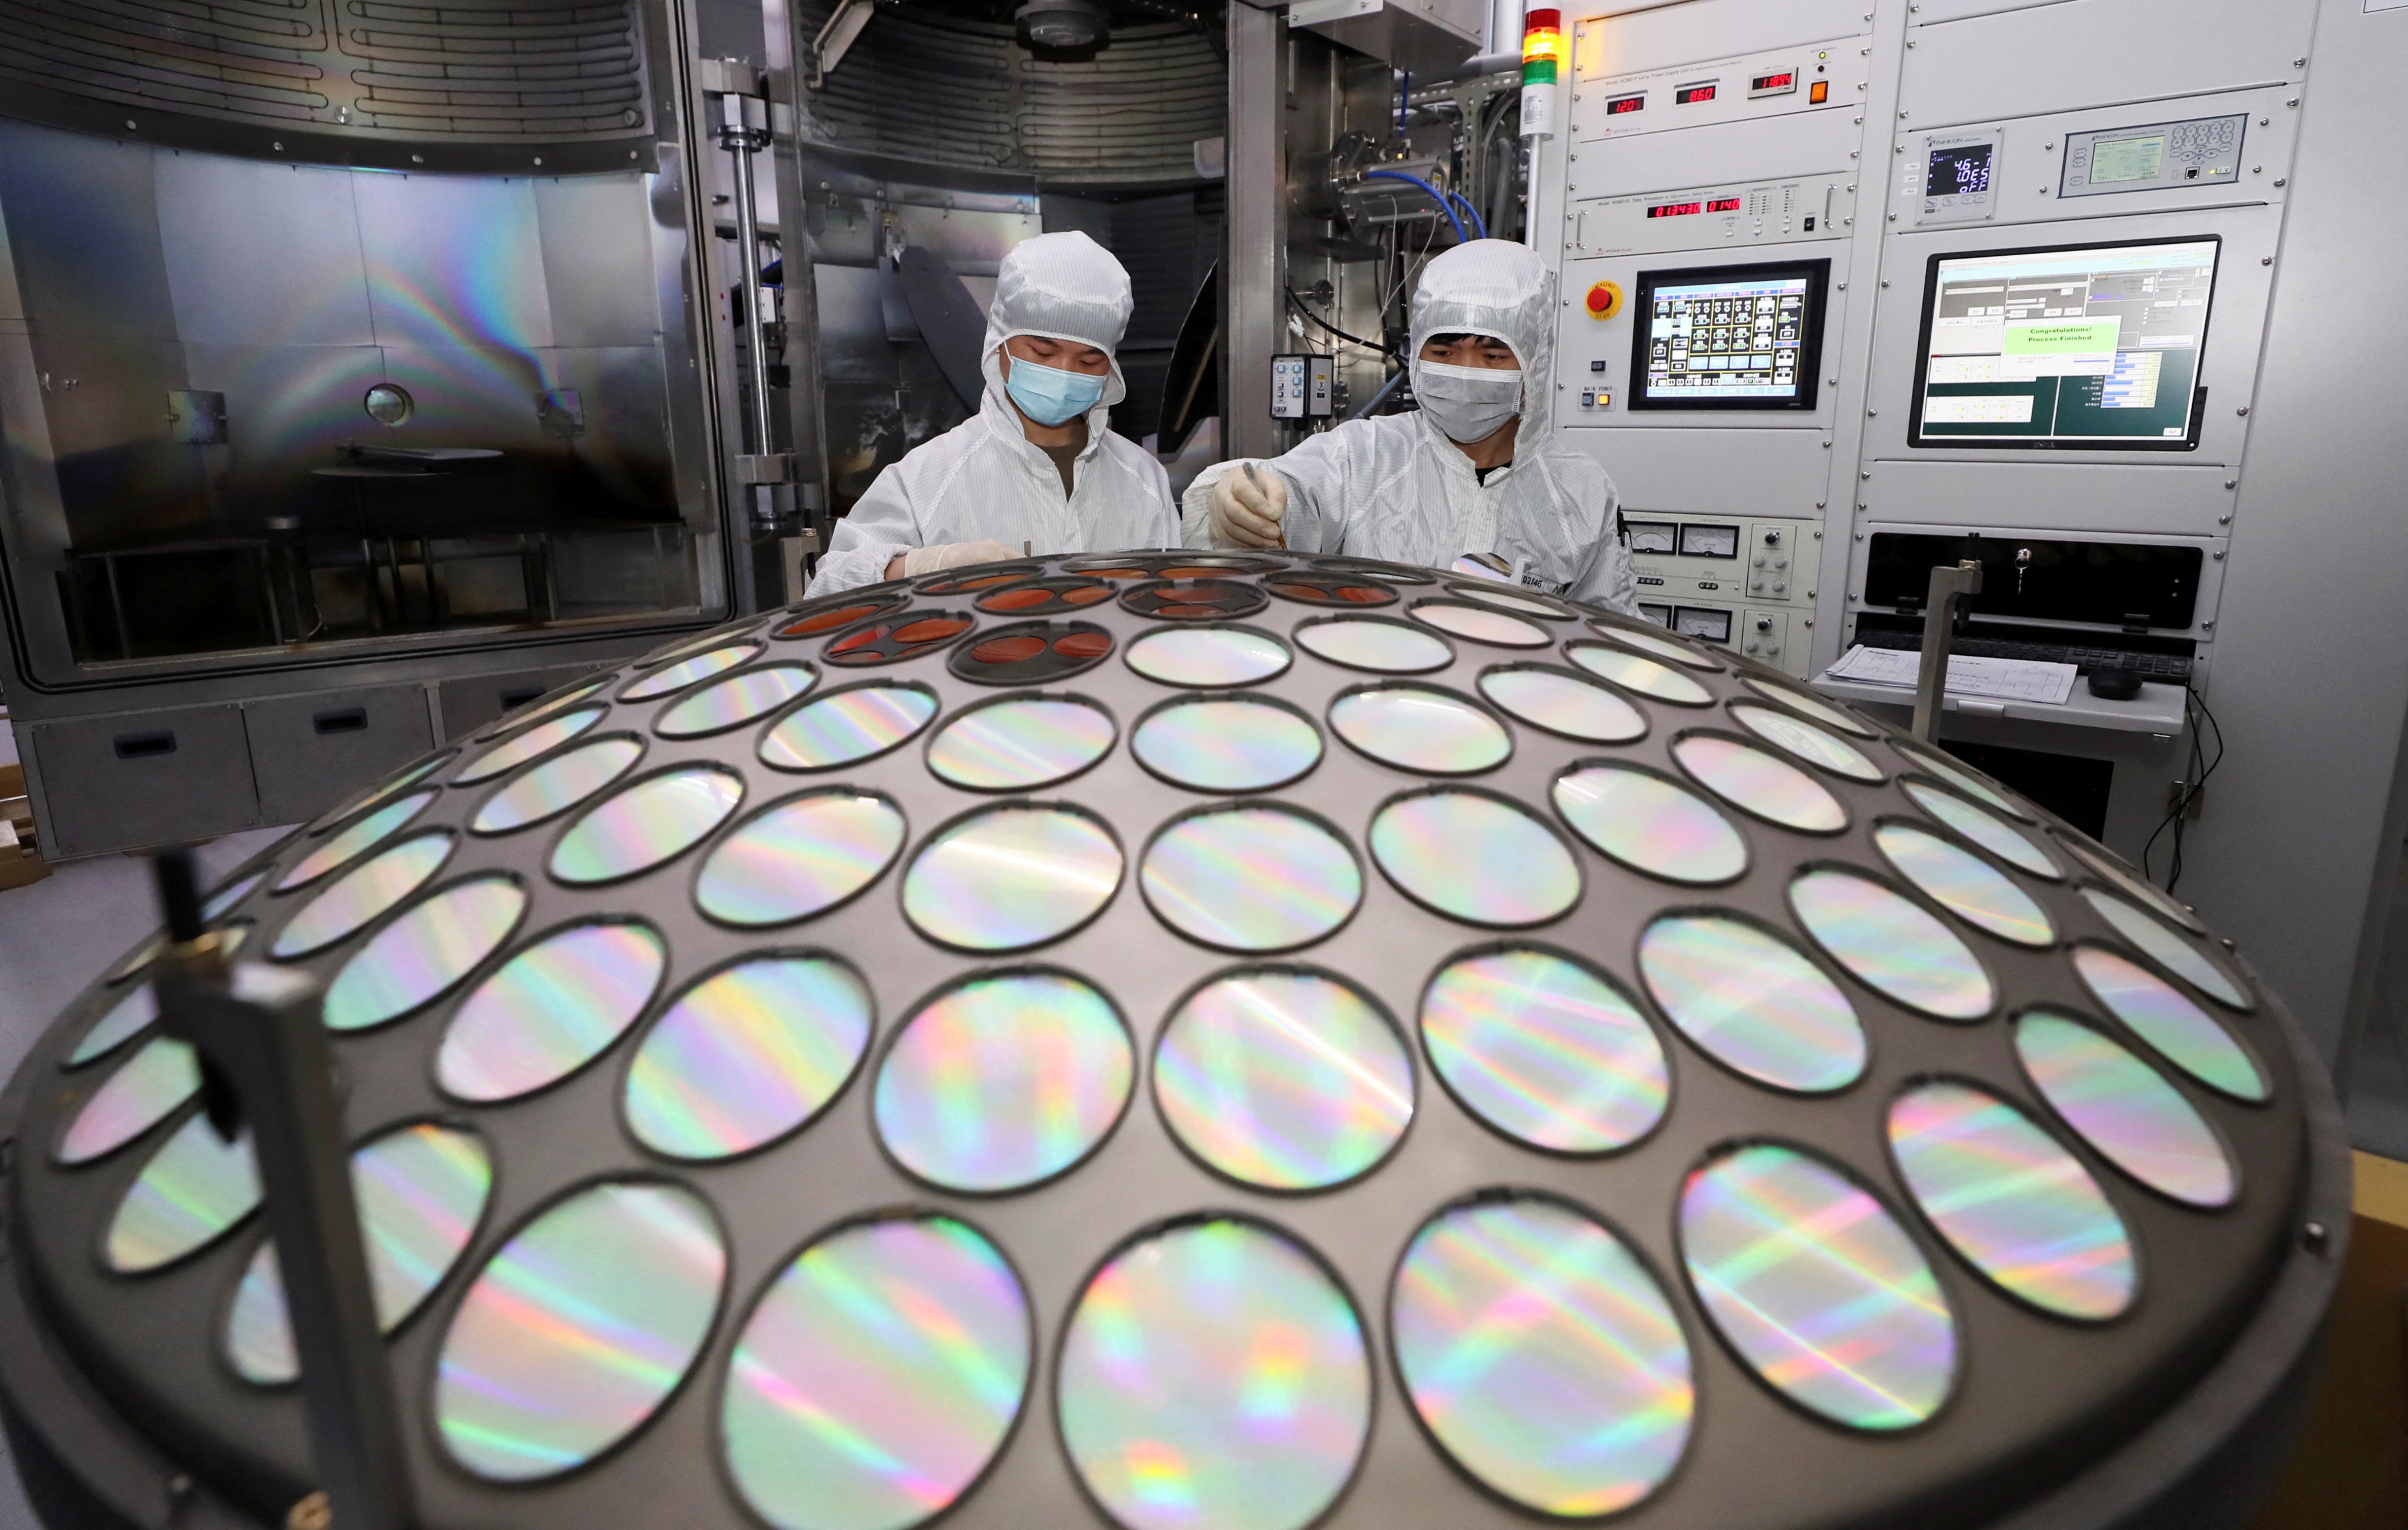 Employees work on the semiconductor chip production line at Jiangsu Azure Corp in Huaian, Jiangsu province, in March 2022. Photo: China Daily via Reuters